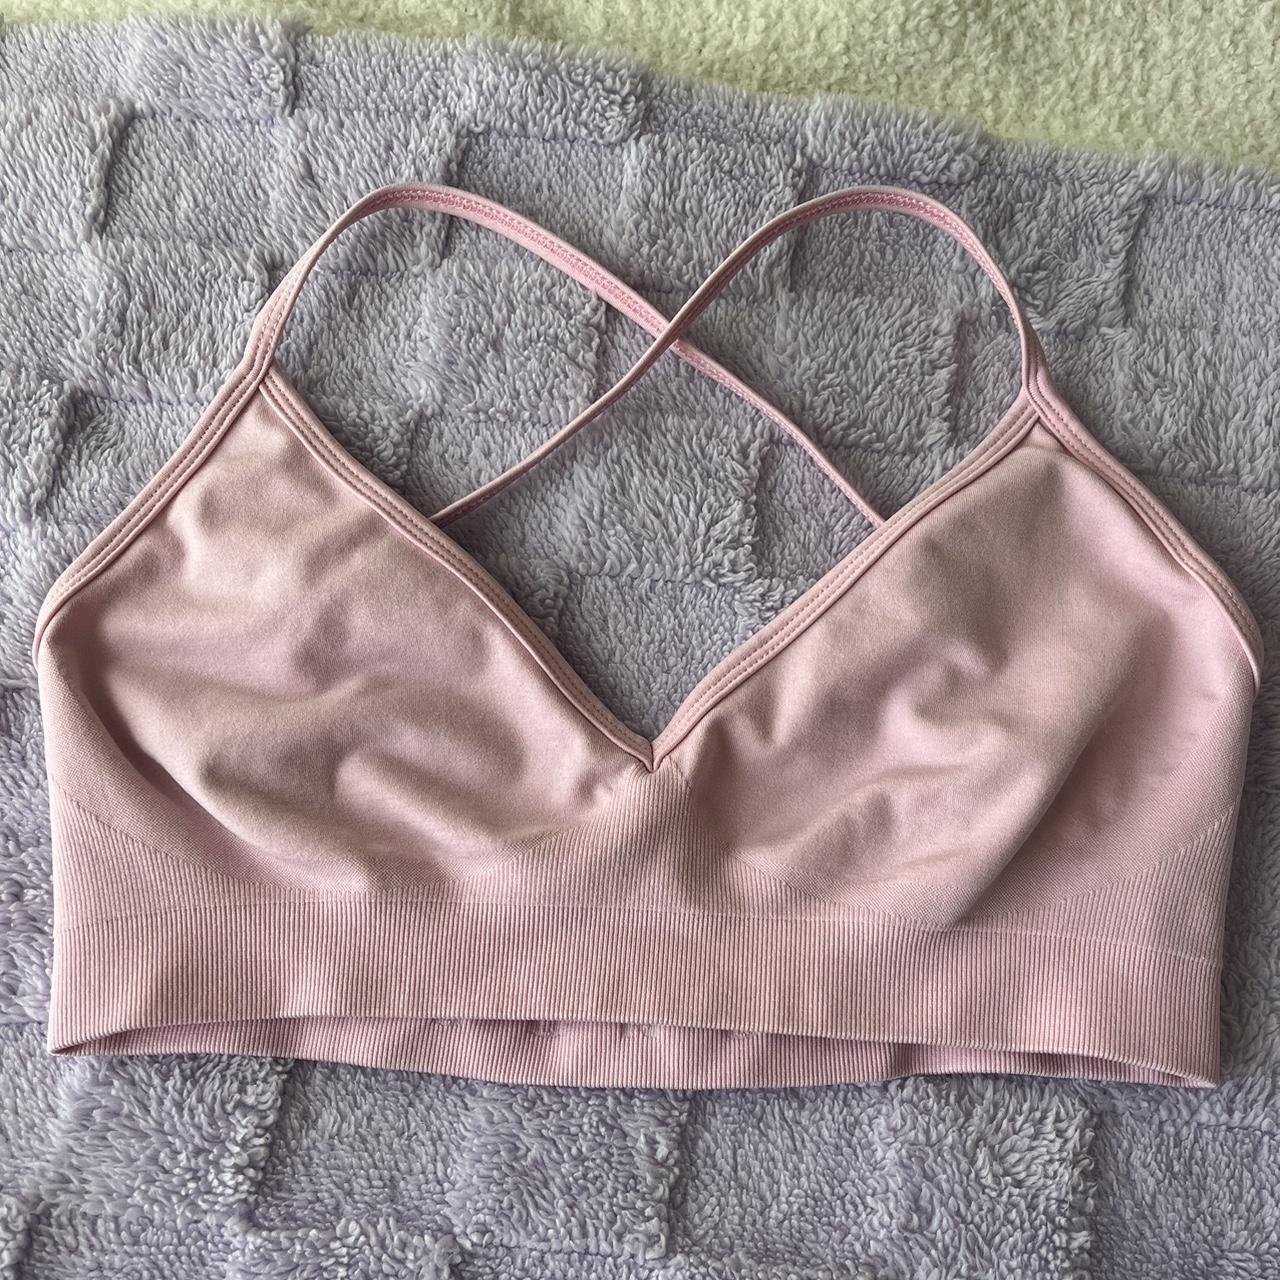 Free people movement sports bra with a webbed open - Depop